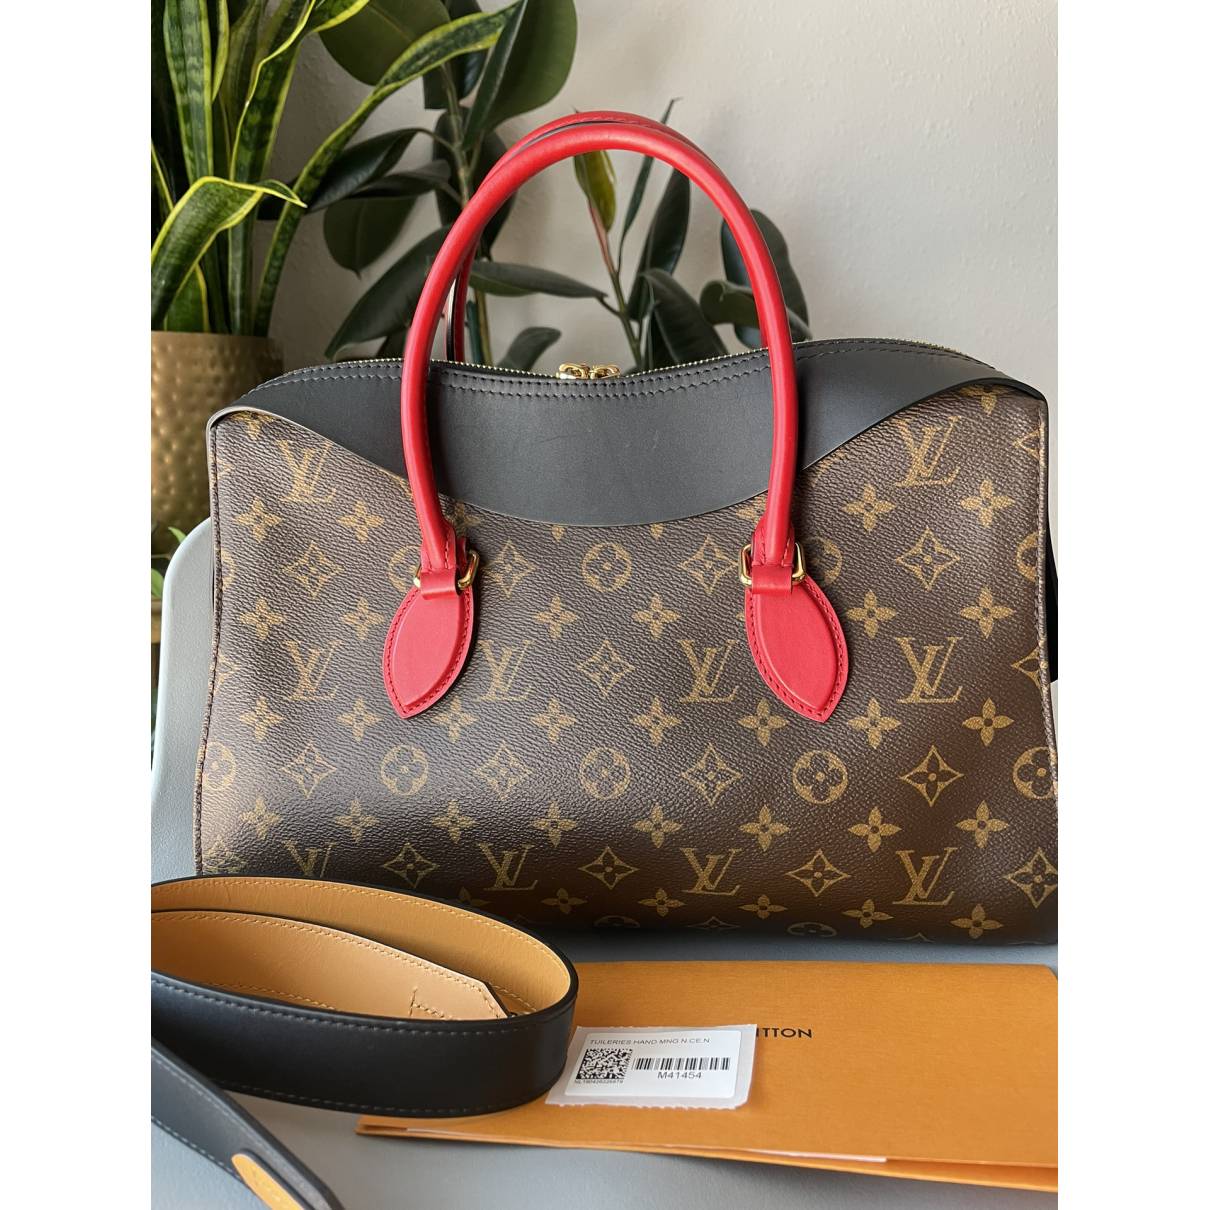 Tuileries leather handbag Louis Vuitton Brown in Leather - 31706068